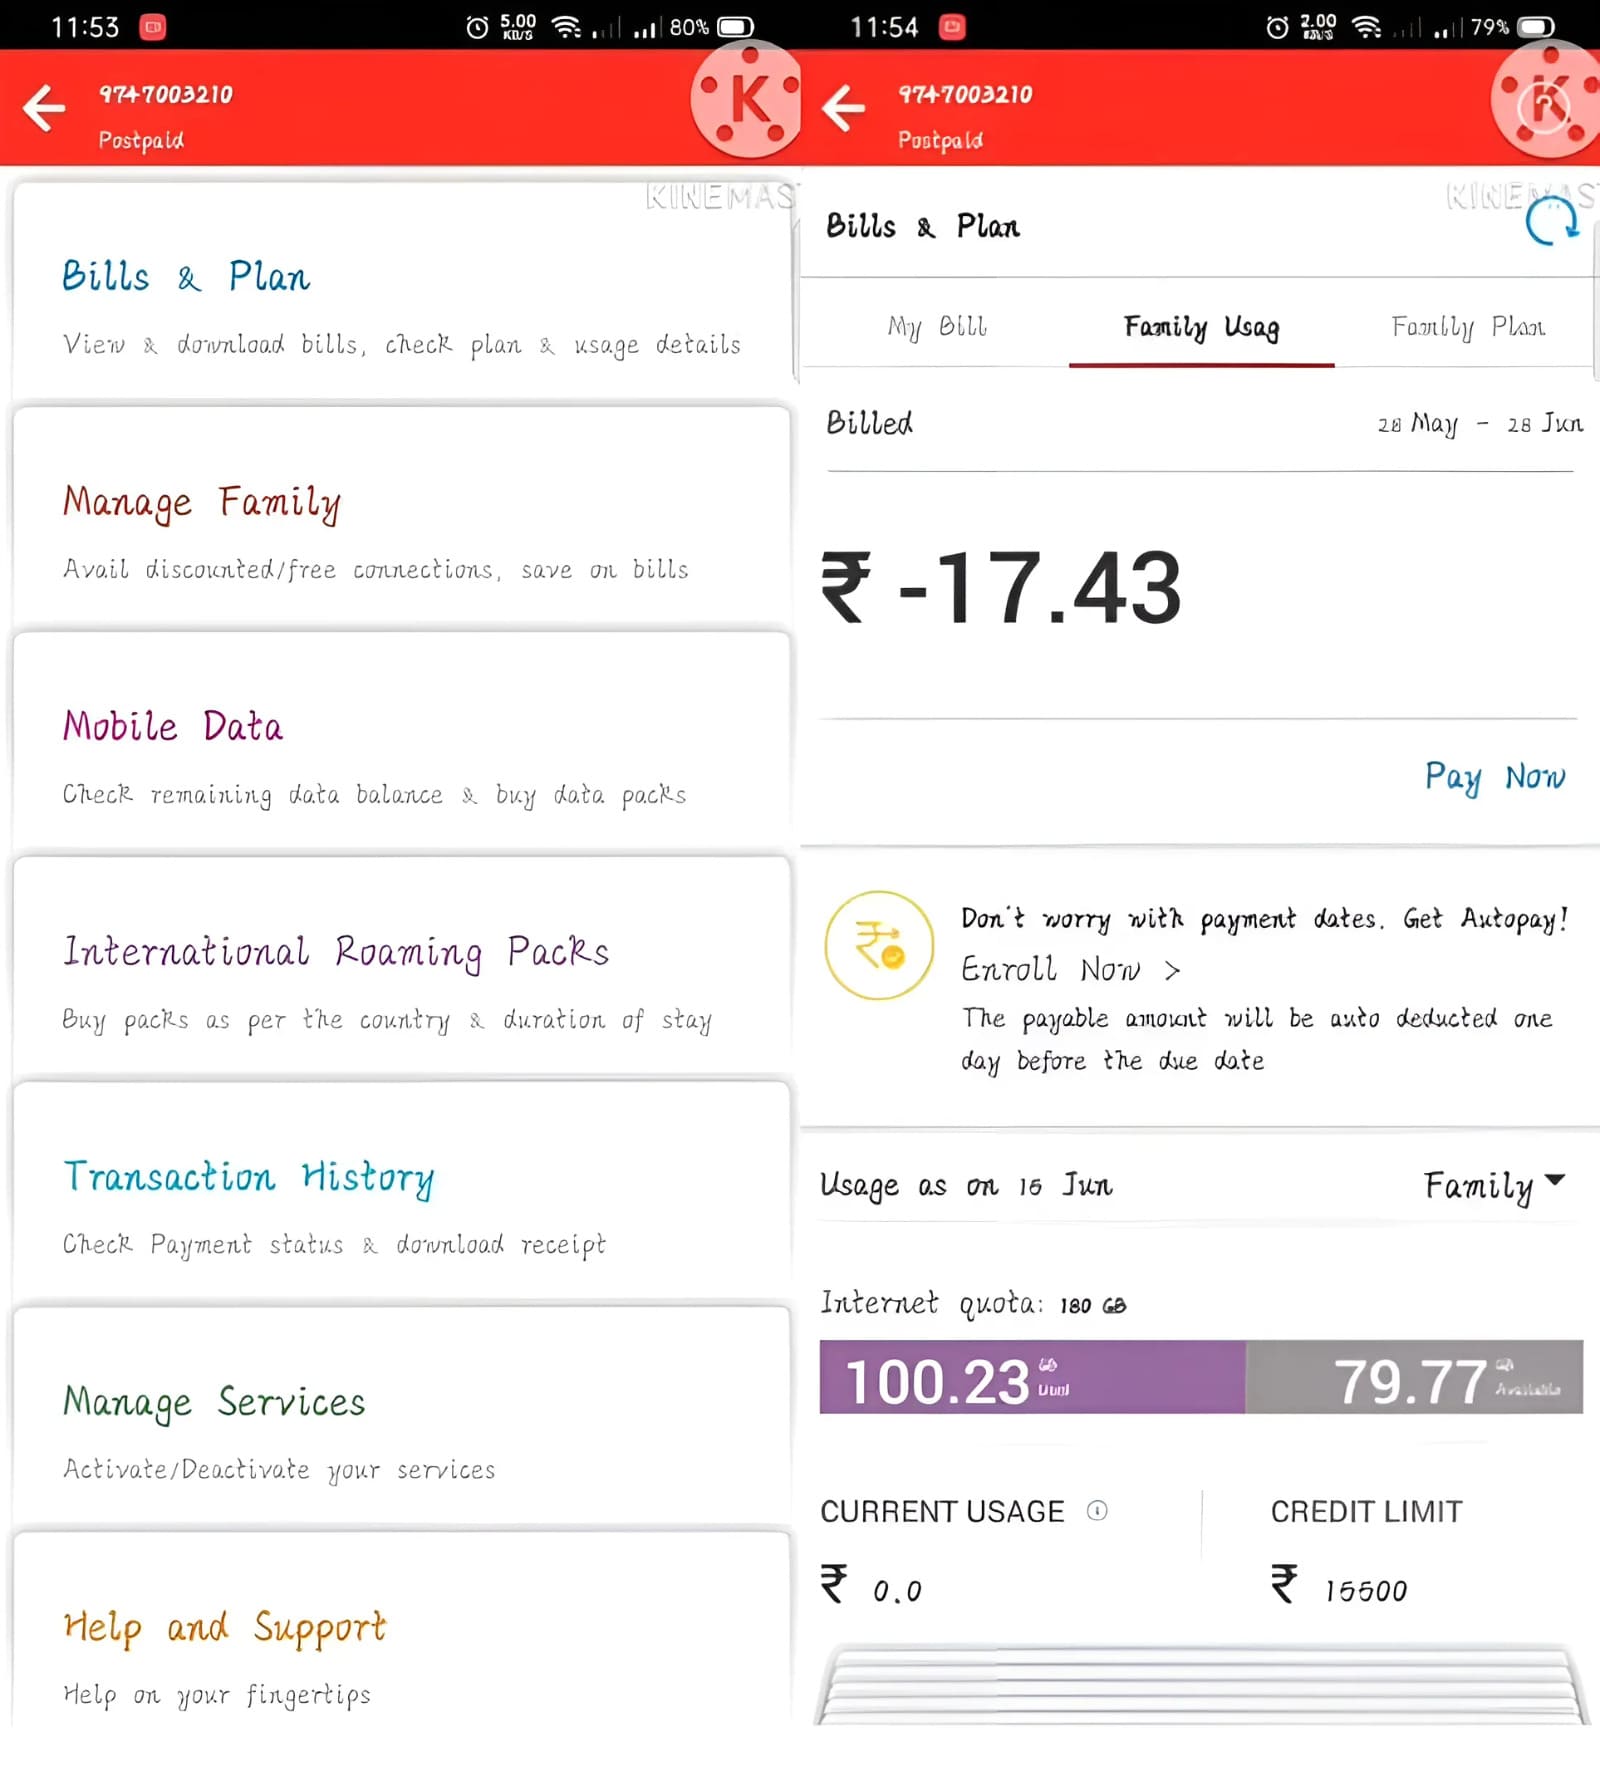 An image of checking data use for family members on Airtel Family plan